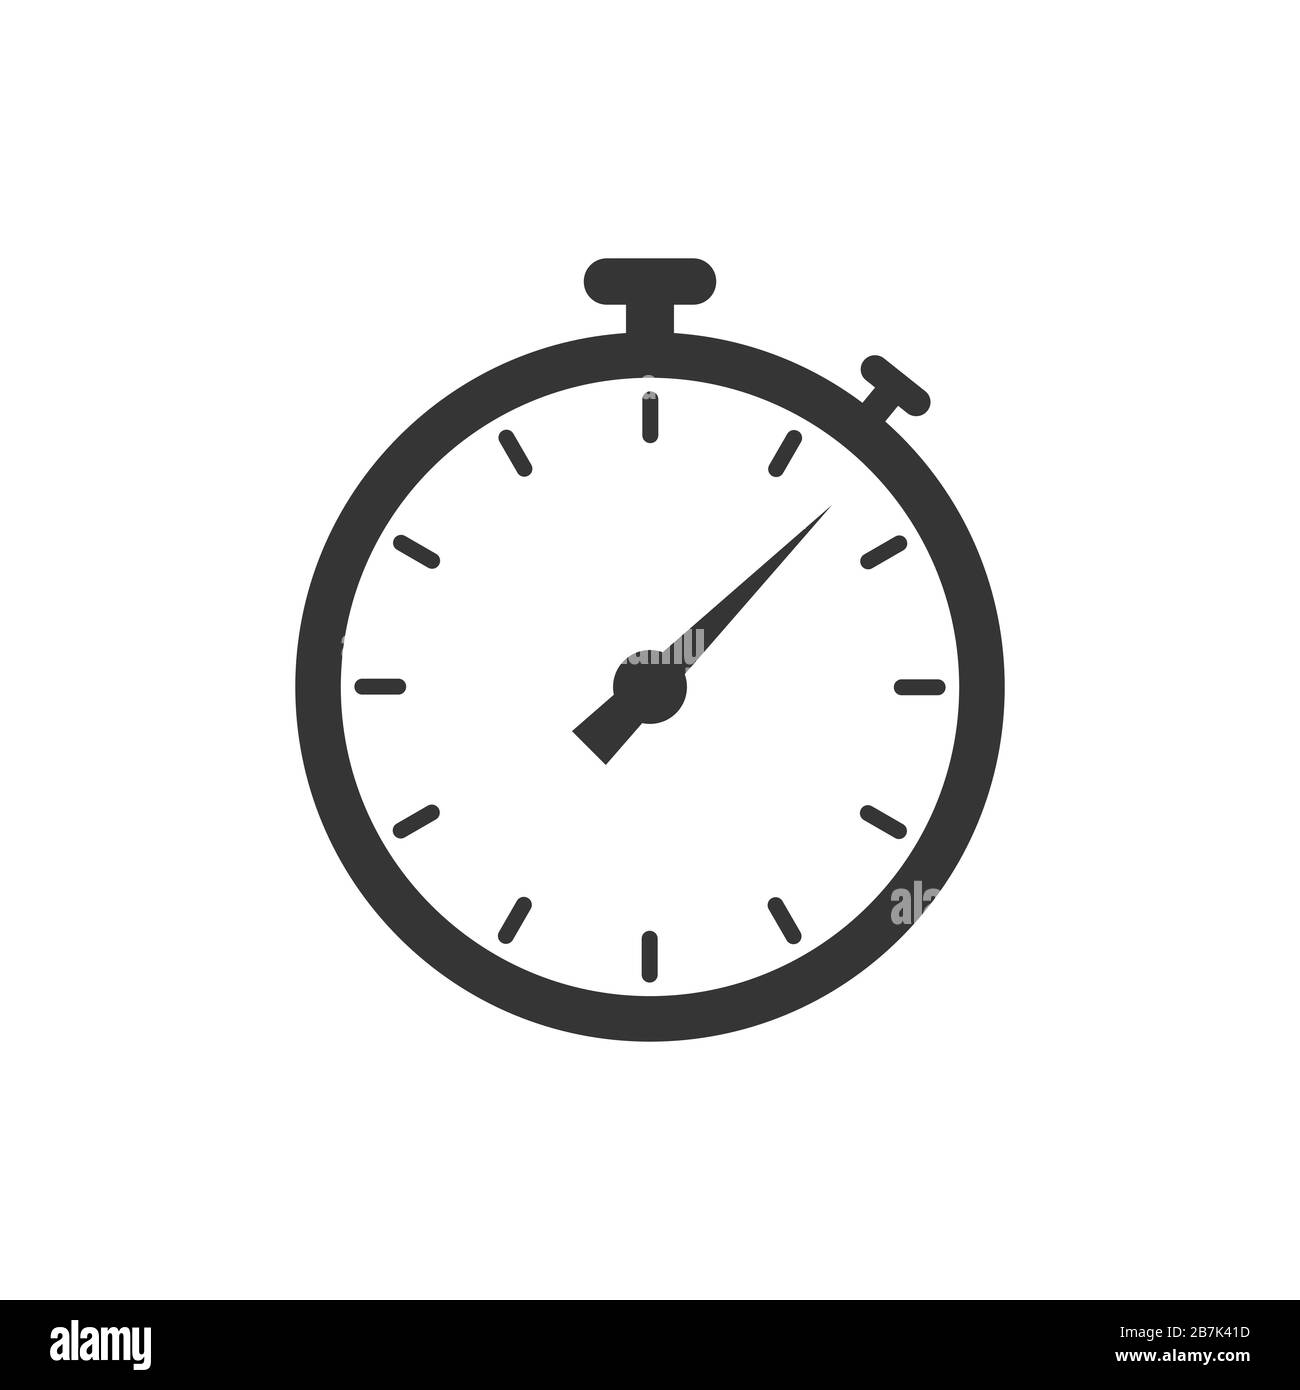 Stopwatch Icon In Thin Line Style Linear Stopwatch Flat Icon Isolate Passage Of Time Vector Illustration Stock Vector Image Art Alamy